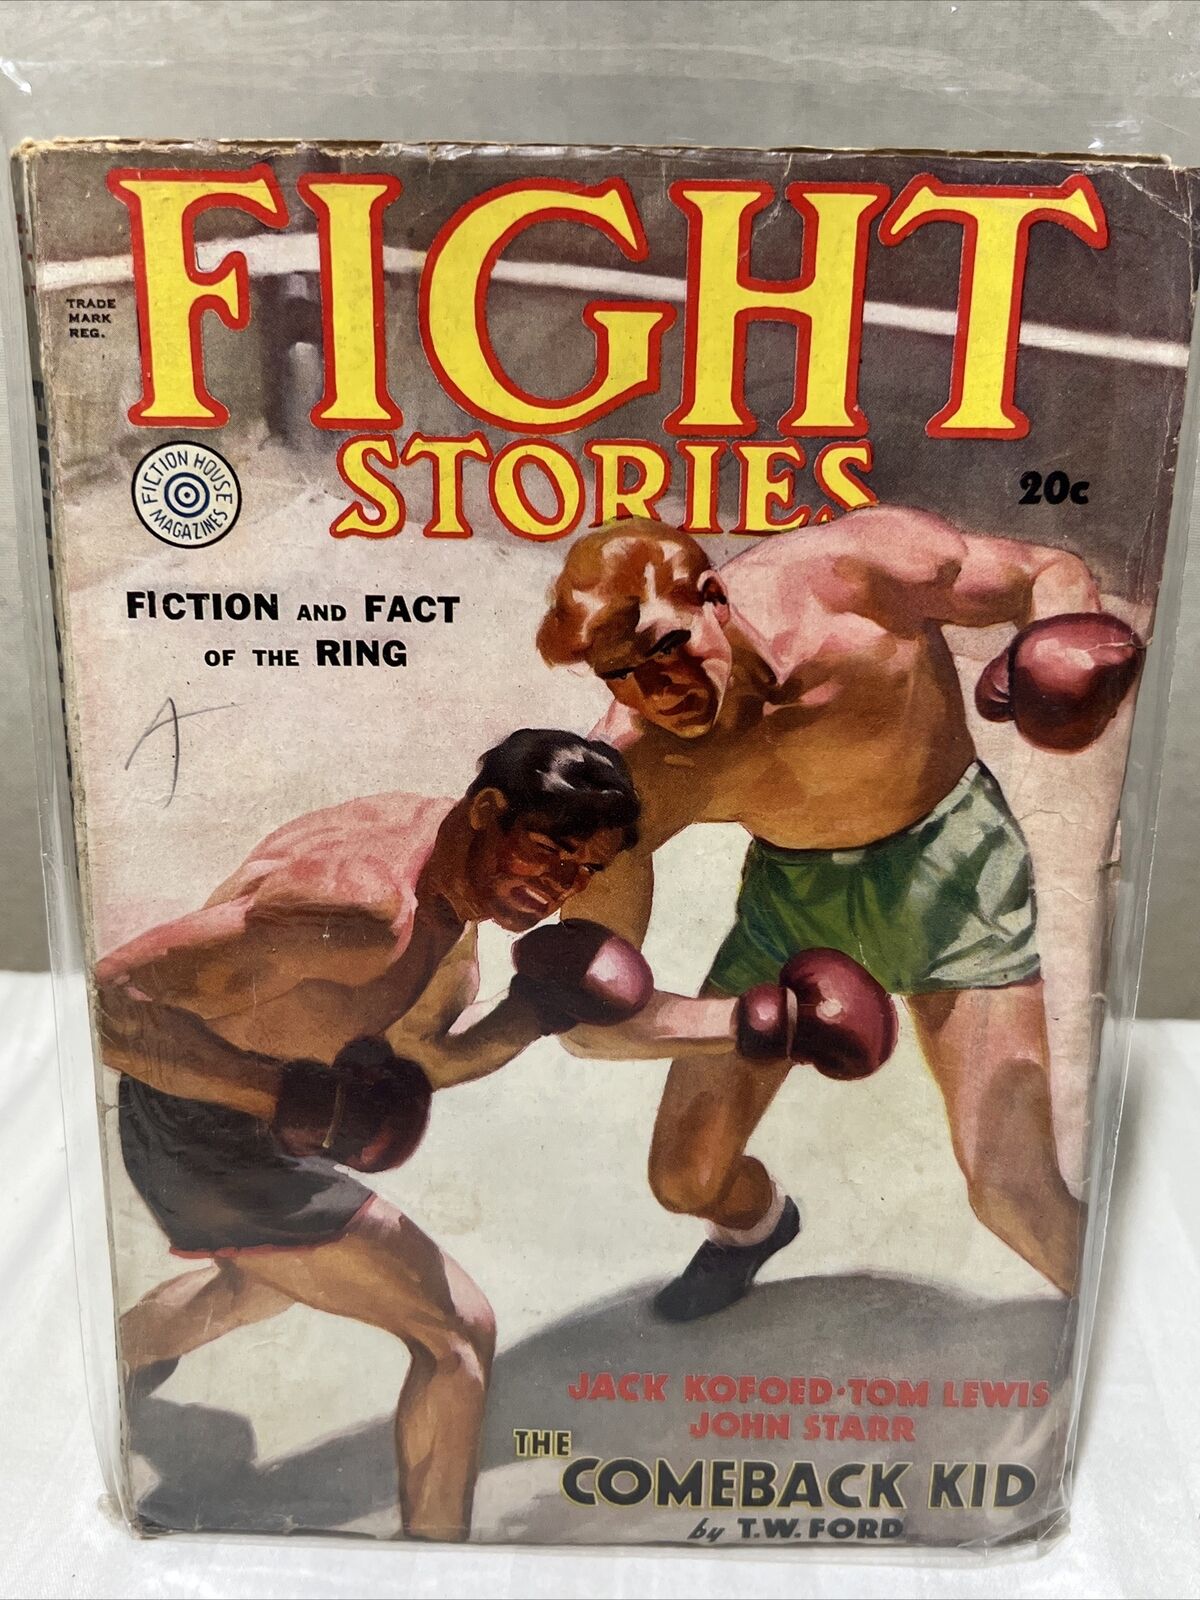 Vintage Fight Stories 1936 Pulp magazine THE COMEBACK KID By T.W. Ford Vol. 5 #2